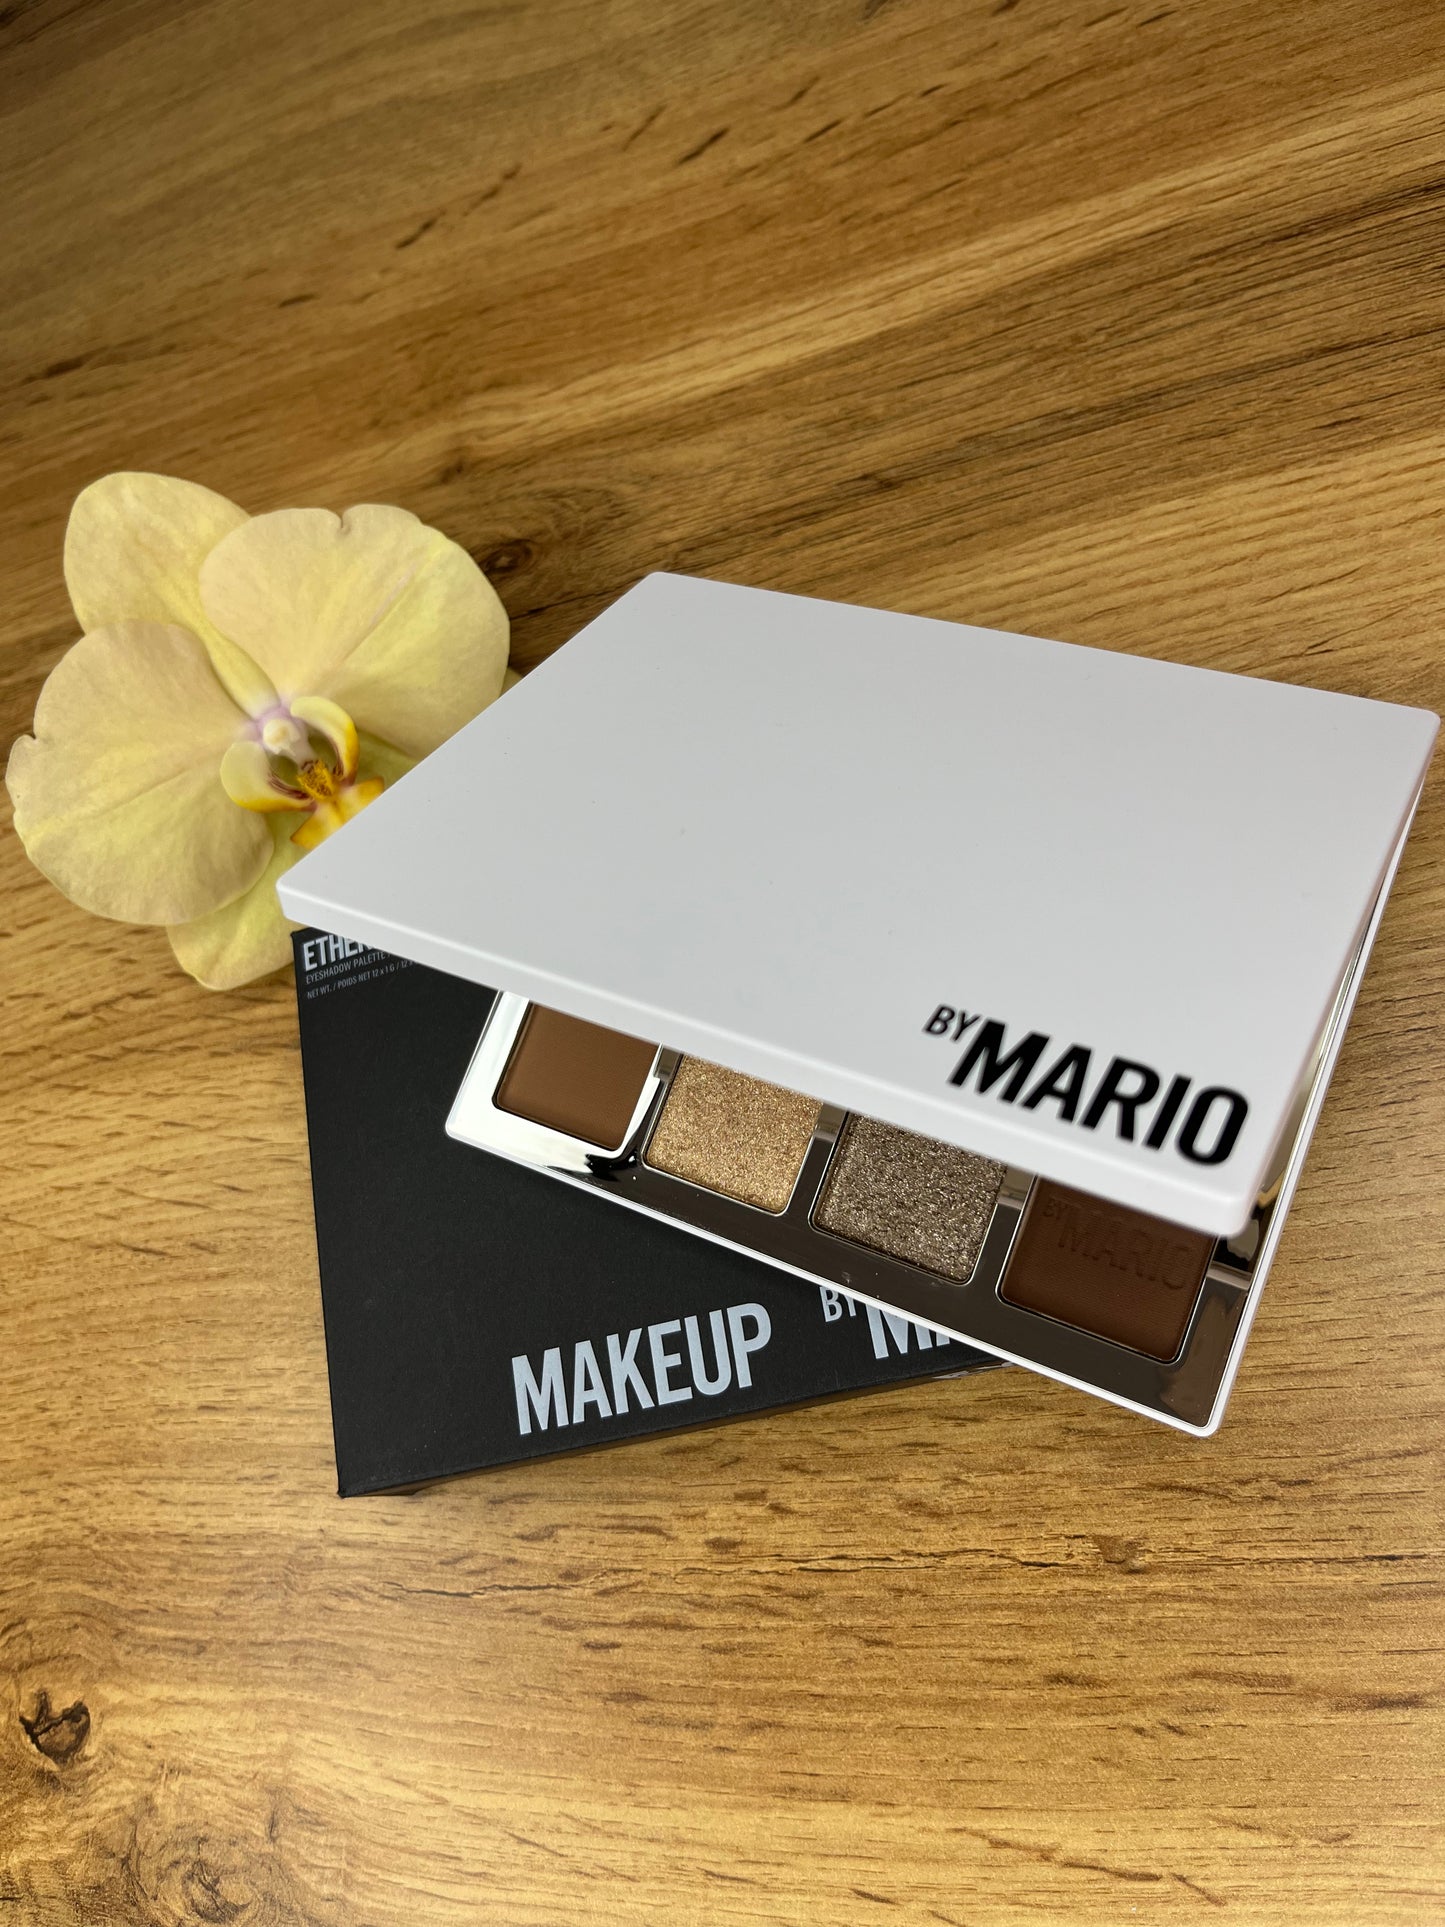 Ethereal palette by Mario